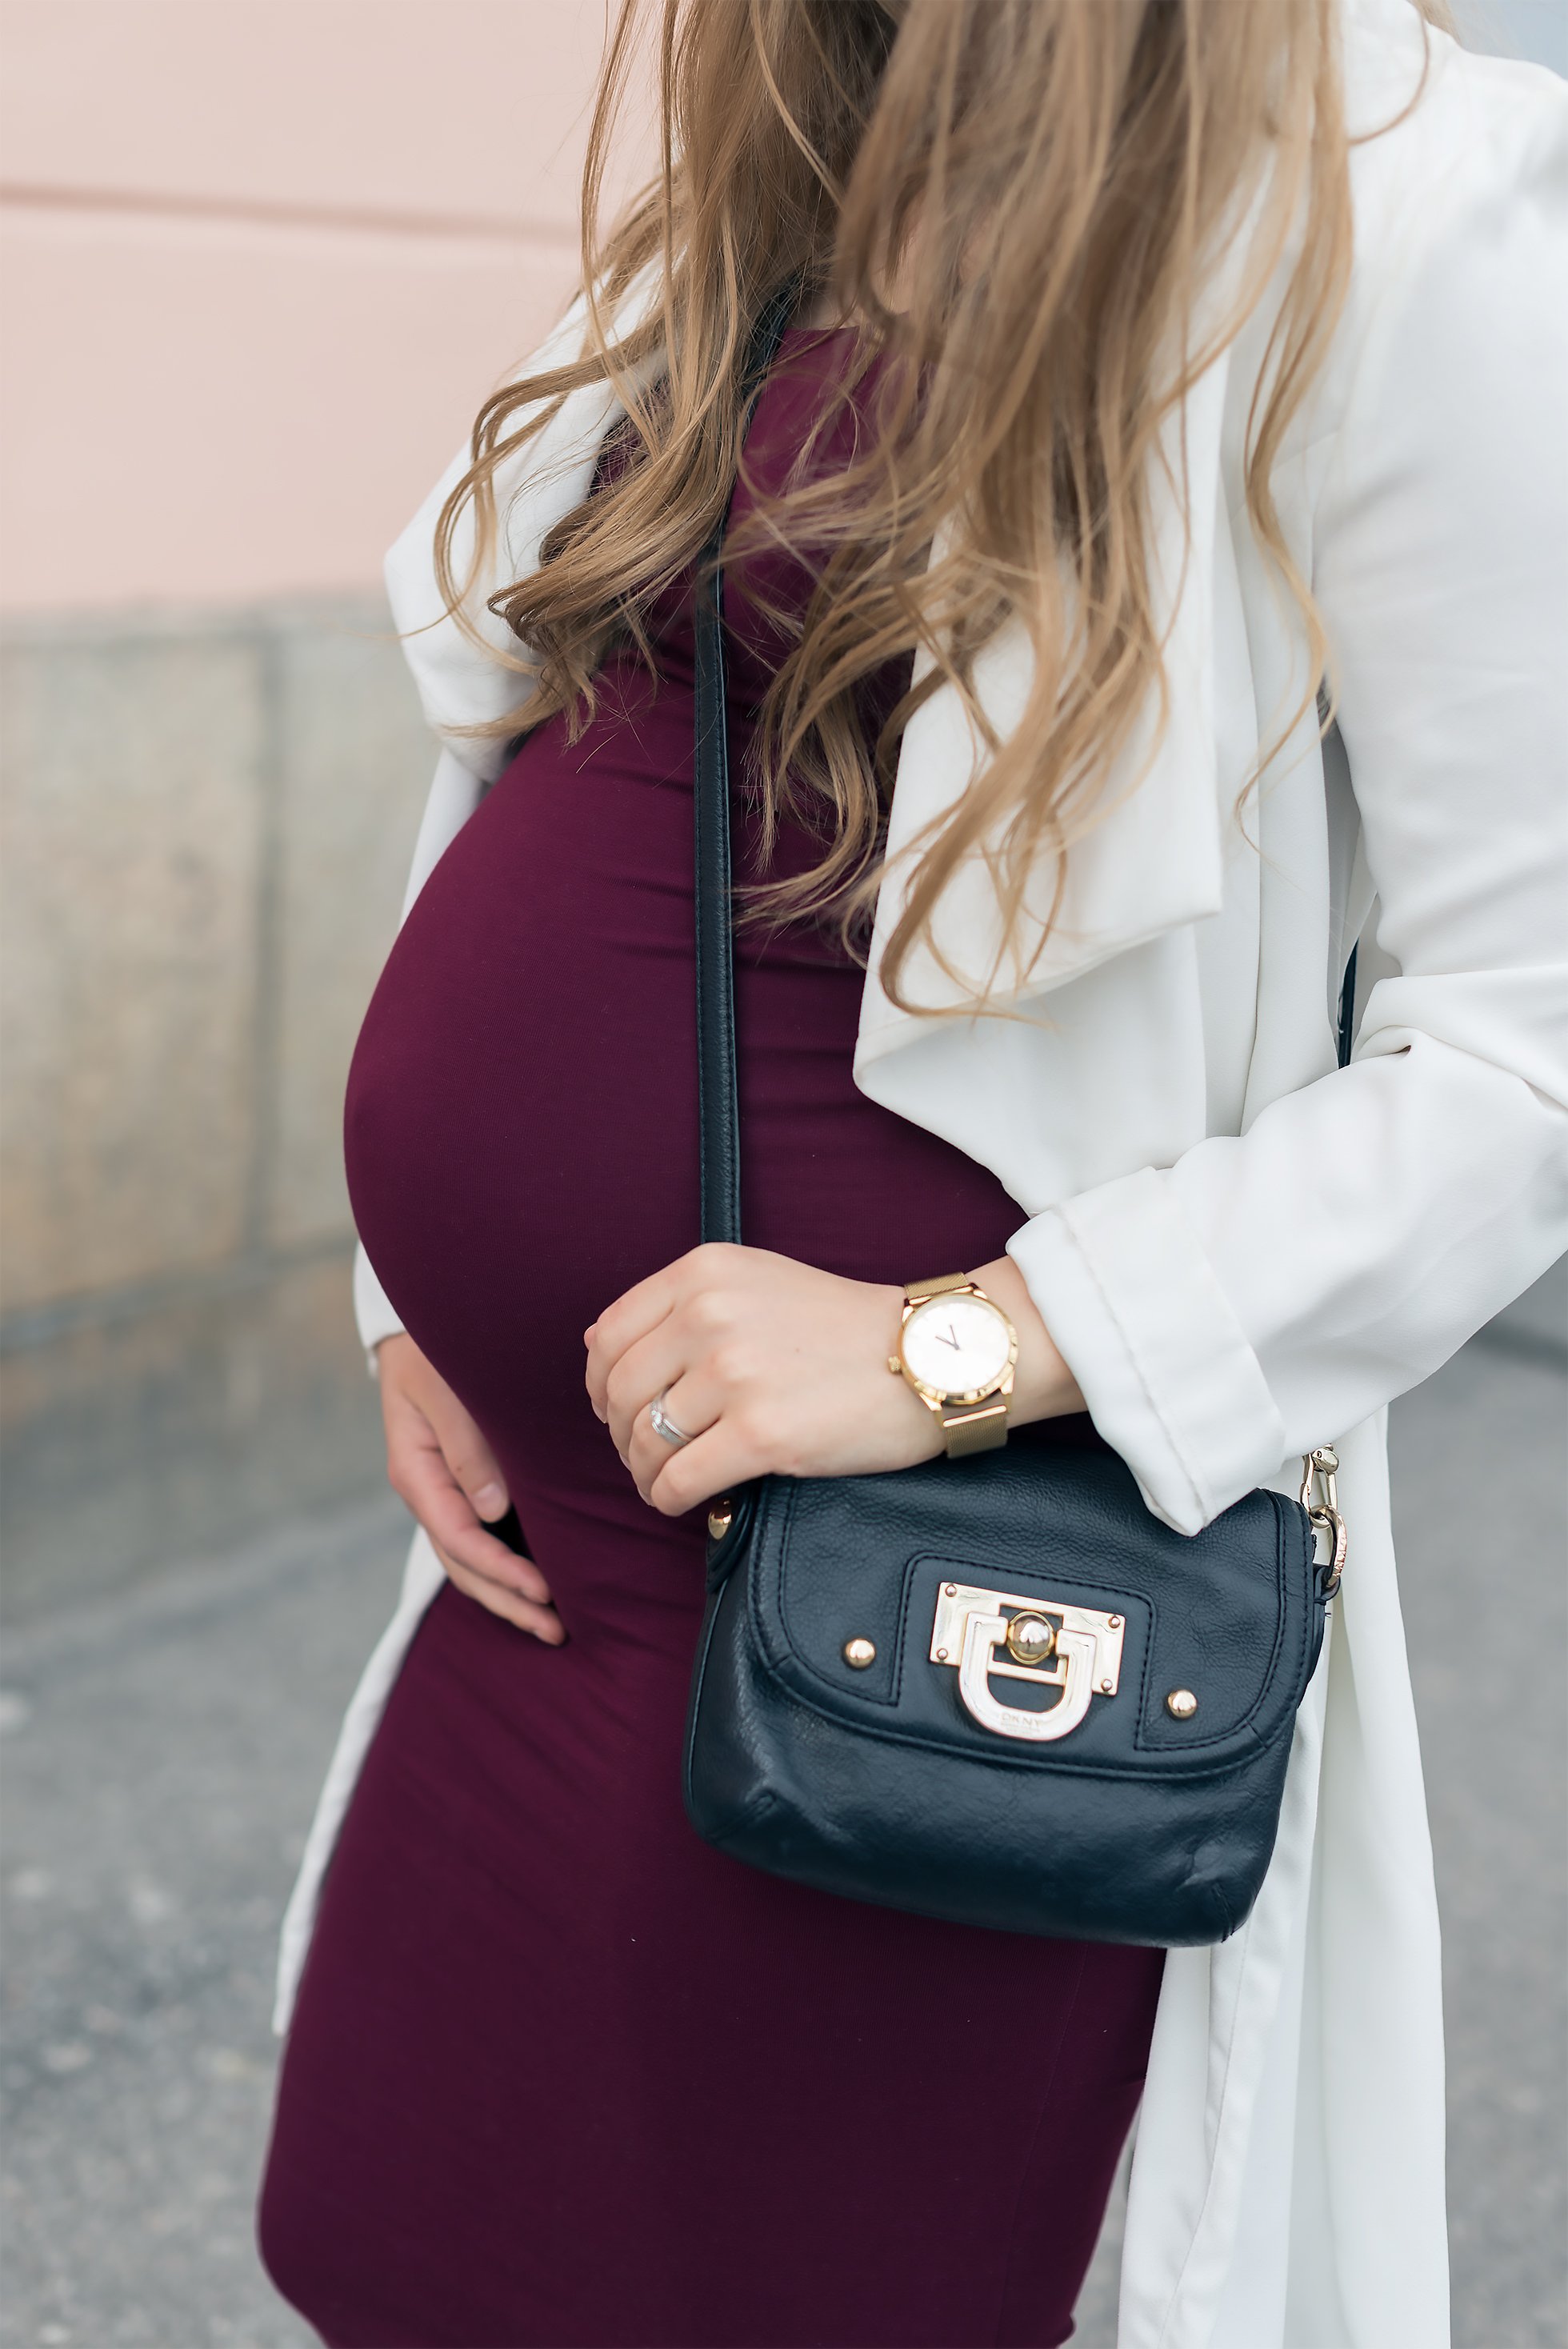 Pregnancy outfits @monasdailystyle